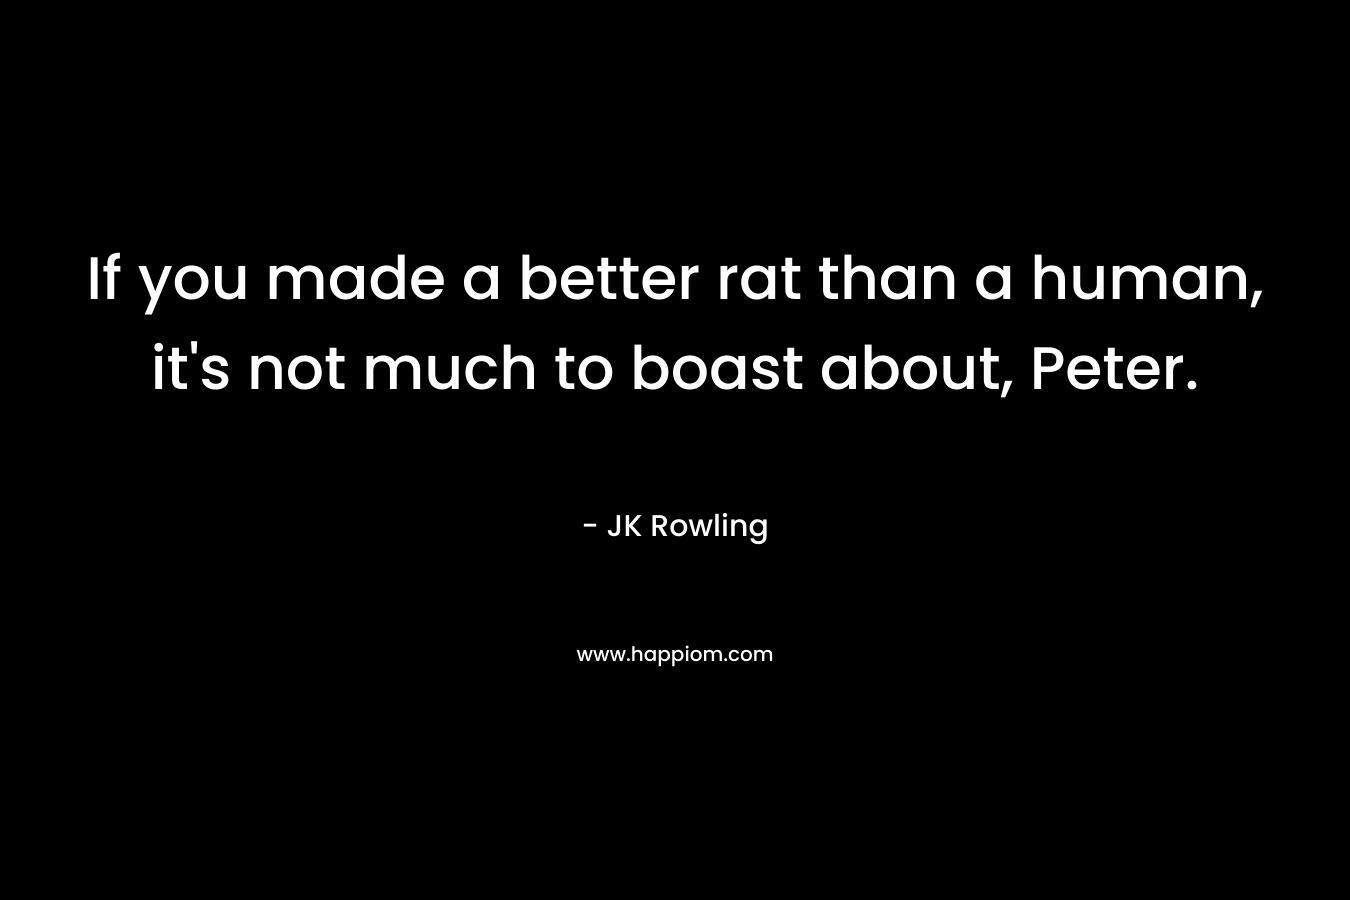 If you made a better rat than a human, it's not much to boast about, Peter.